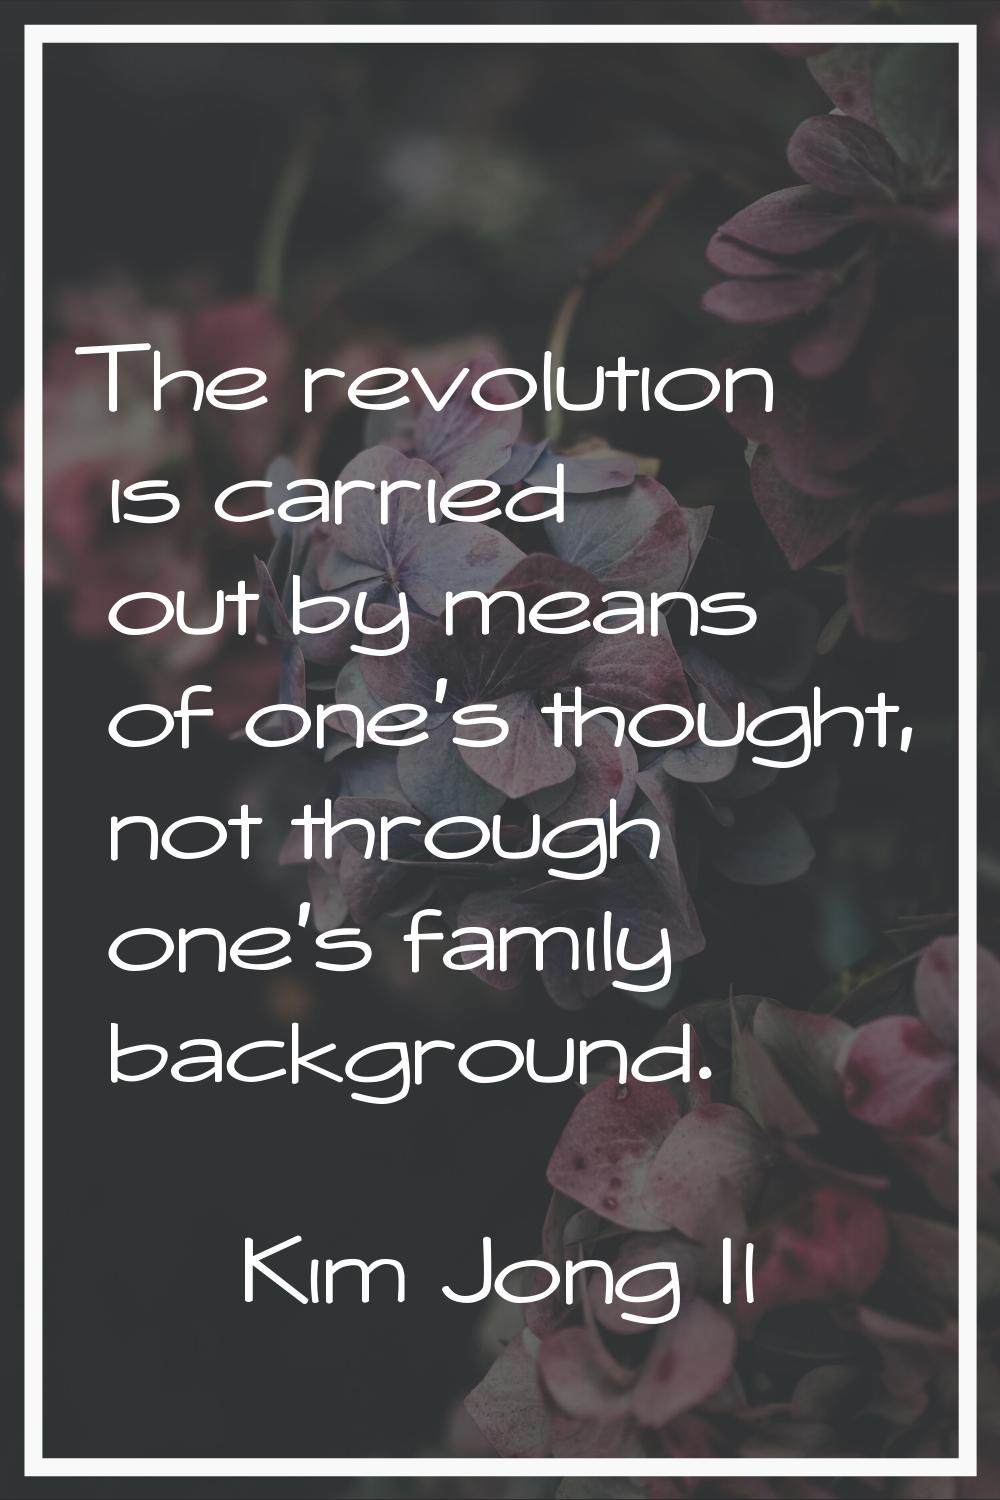 The revolution is carried out by means of one's thought, not through one's family background.